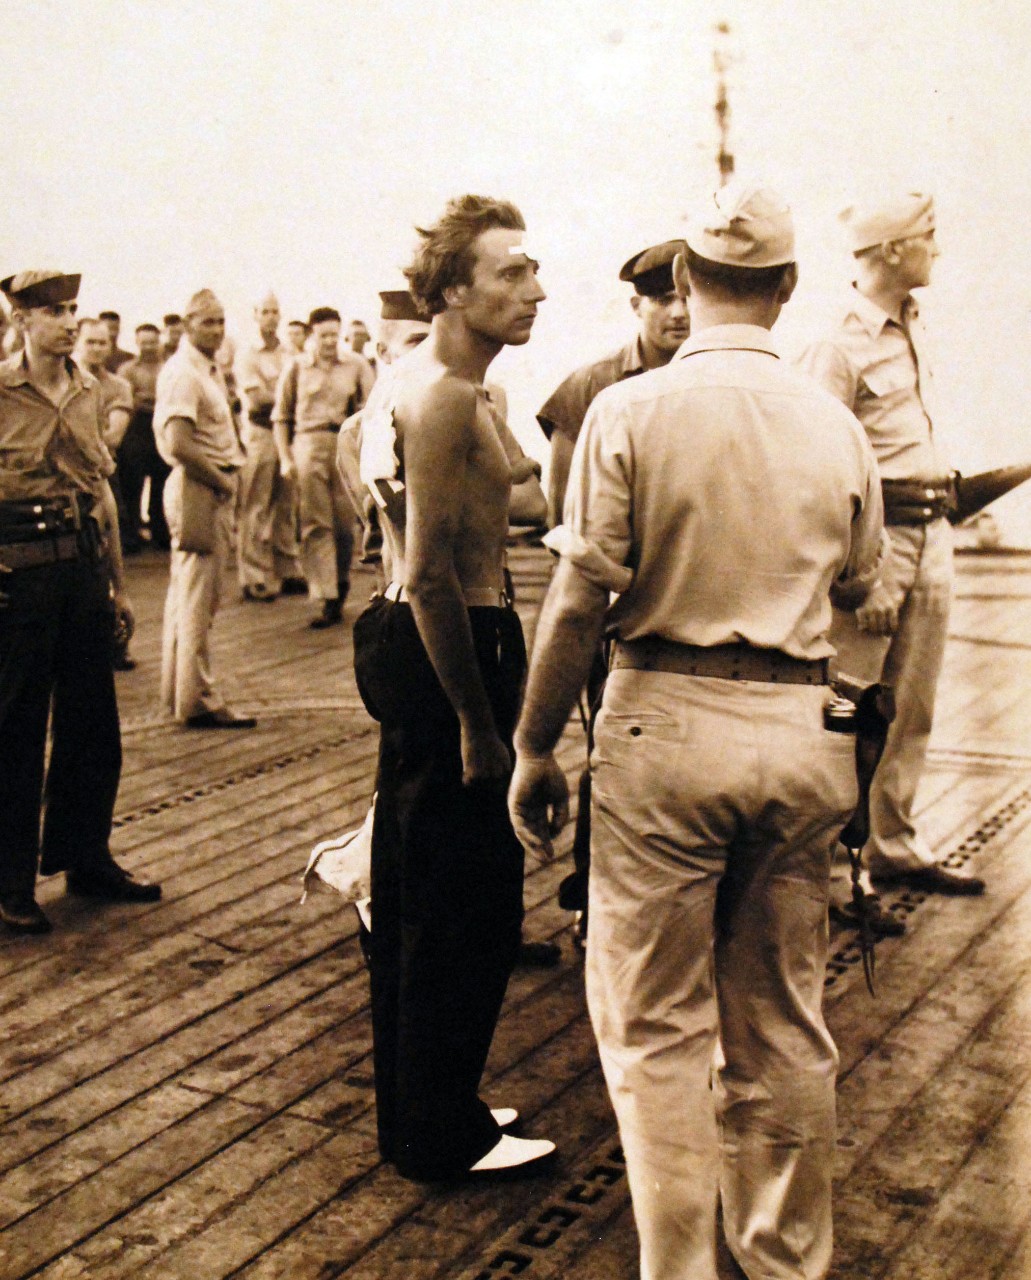 <p>80-G-77199: Air attacks on German U-boats, WWII. The German captain of U-185 and U-604 survivors onboard USS Core (CVE-13), August 24, 1943. They are being directed by the Master-At-Arms. Incident #4082.&nbsp;</p>
